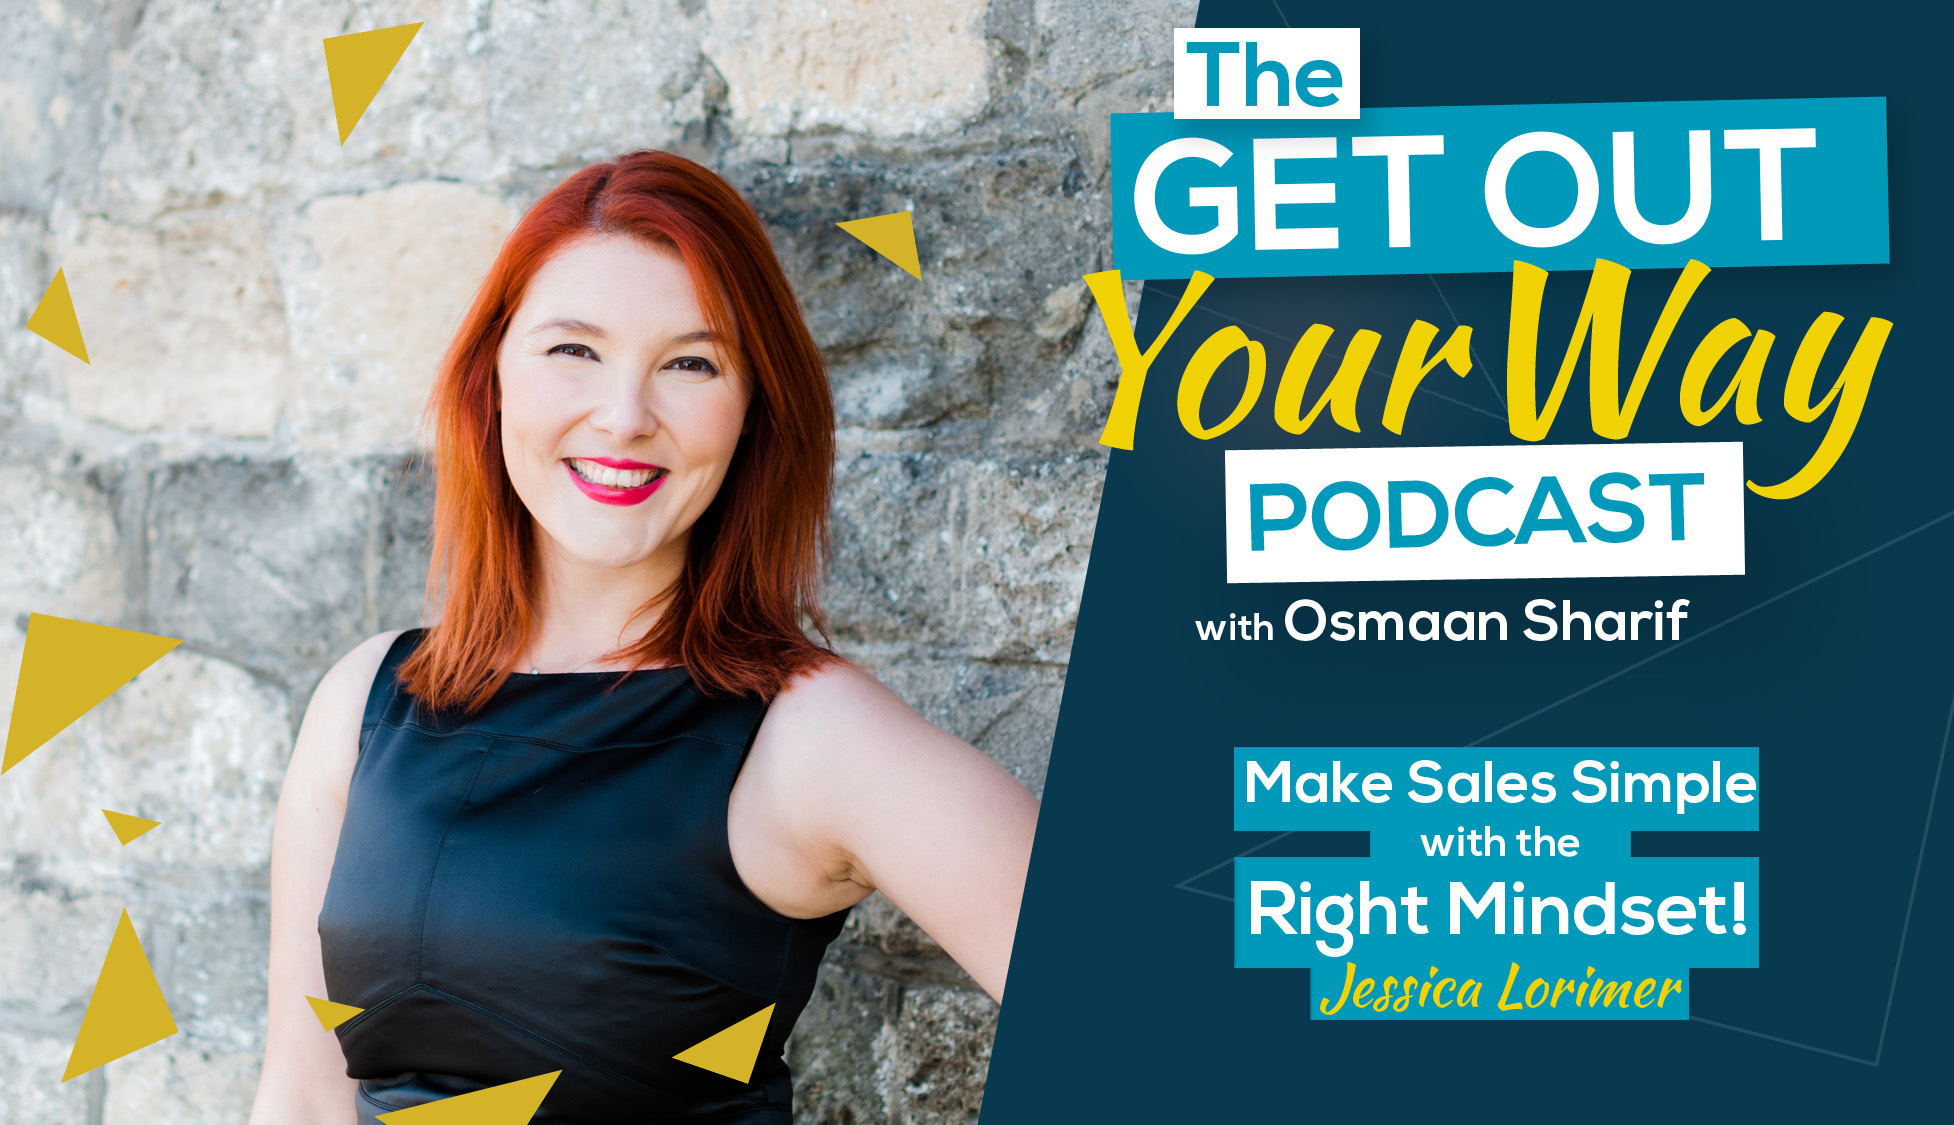 Make Sales Simple with the Right Mindset with Jessica Lorimer